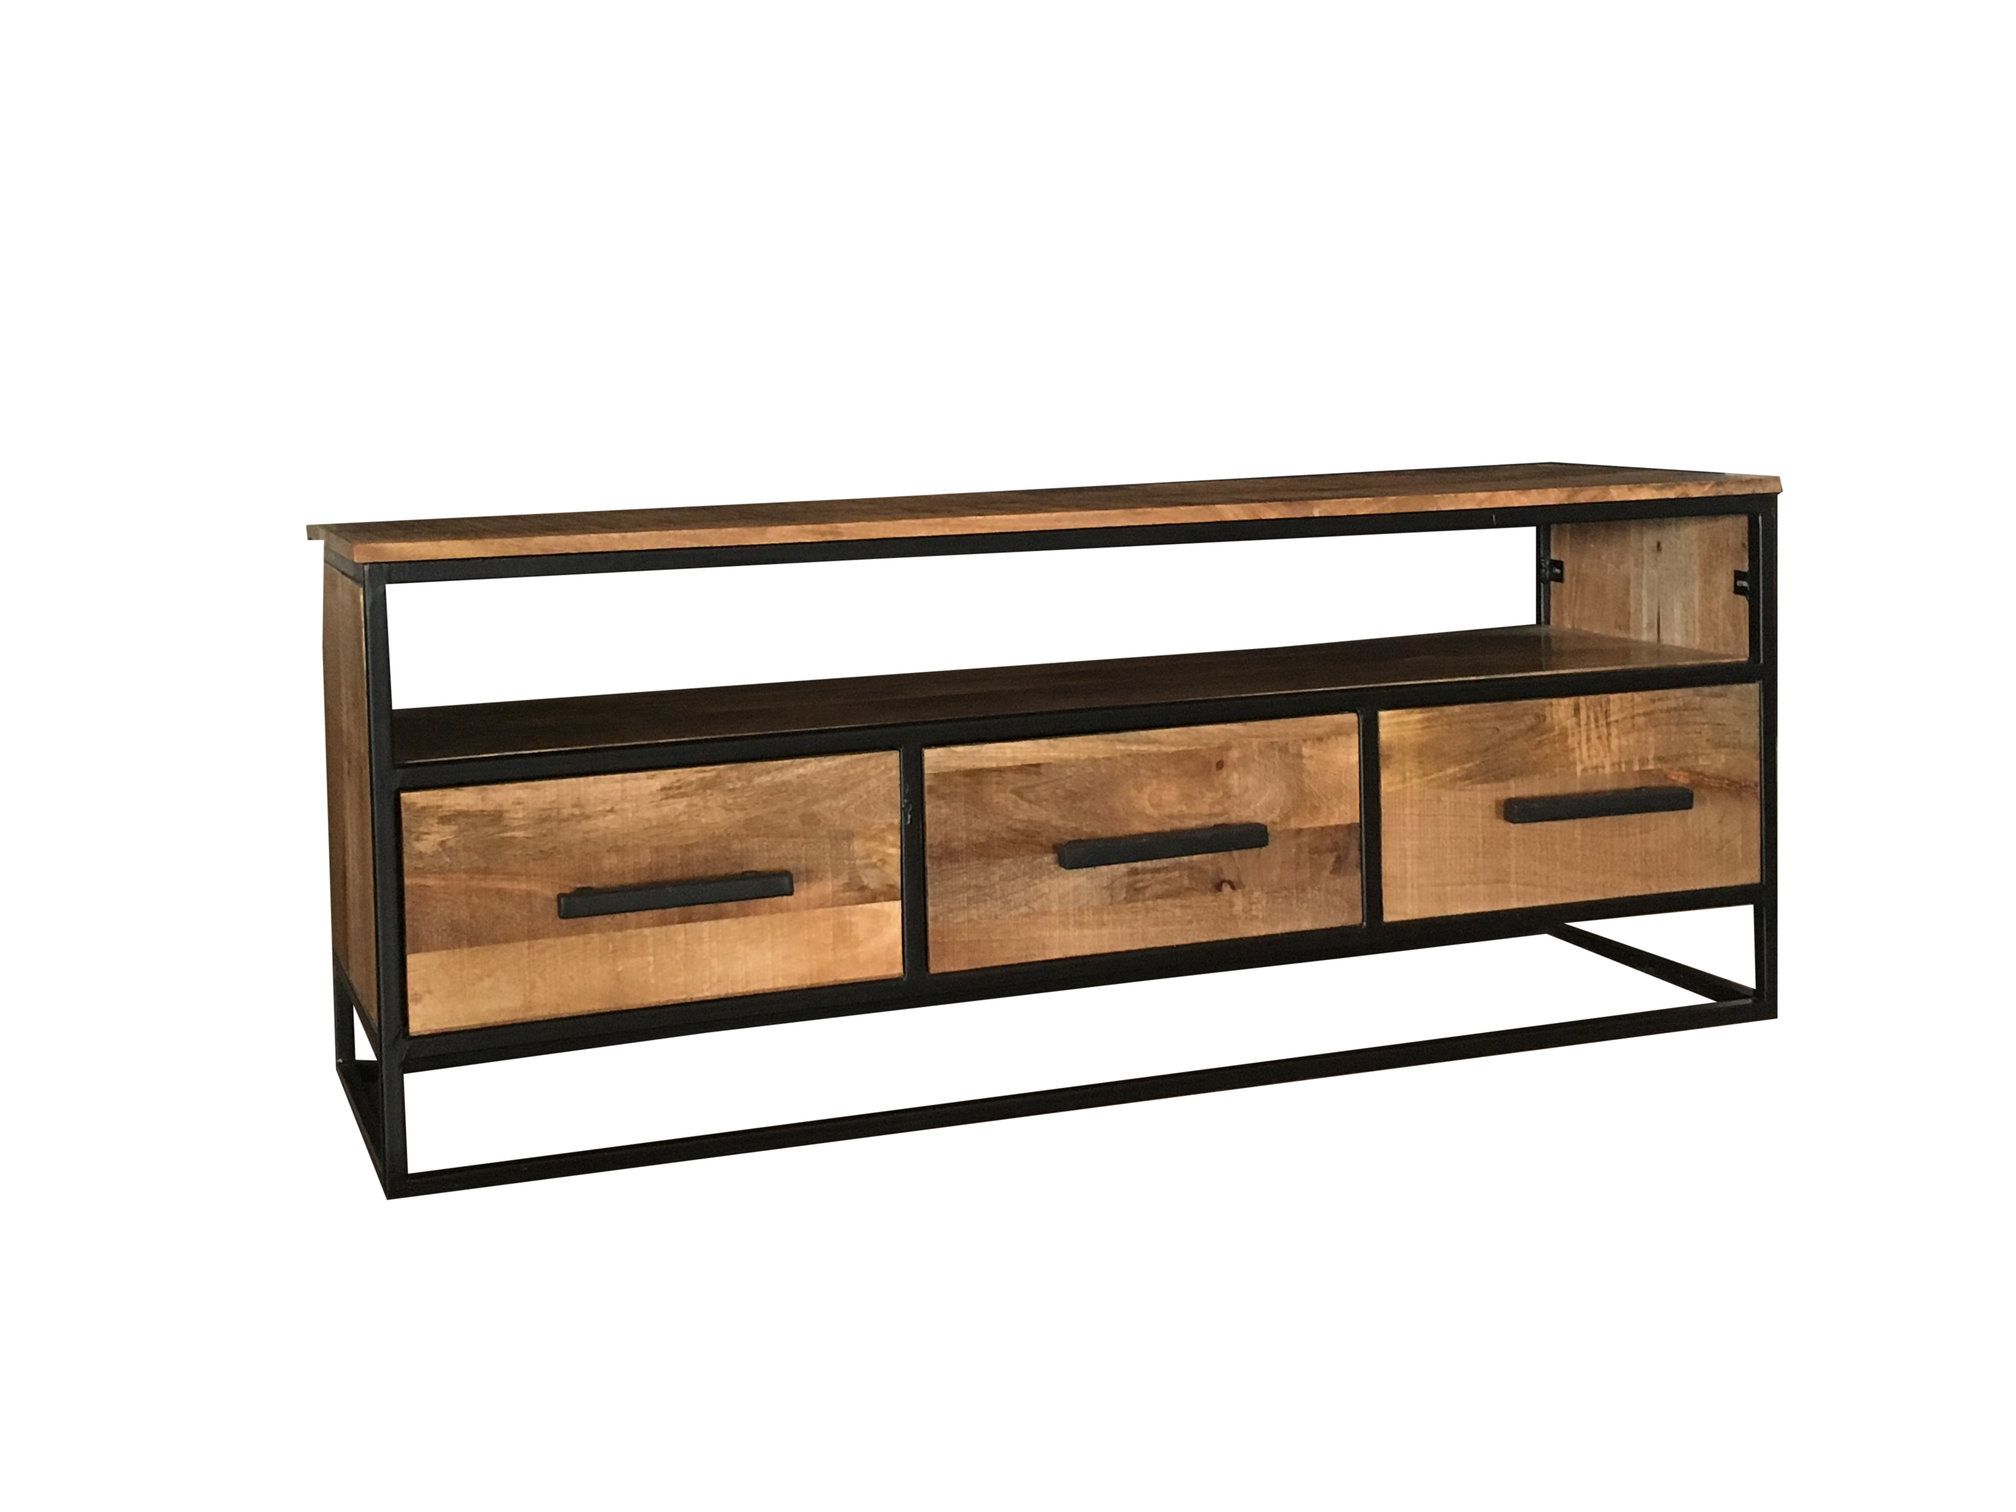 Most Recent Mango Wood Tv Stands Regarding Industrial Style 140 Cm Light Mango Wood 3 Drawer Tv Stand Media (View 11 of 20)